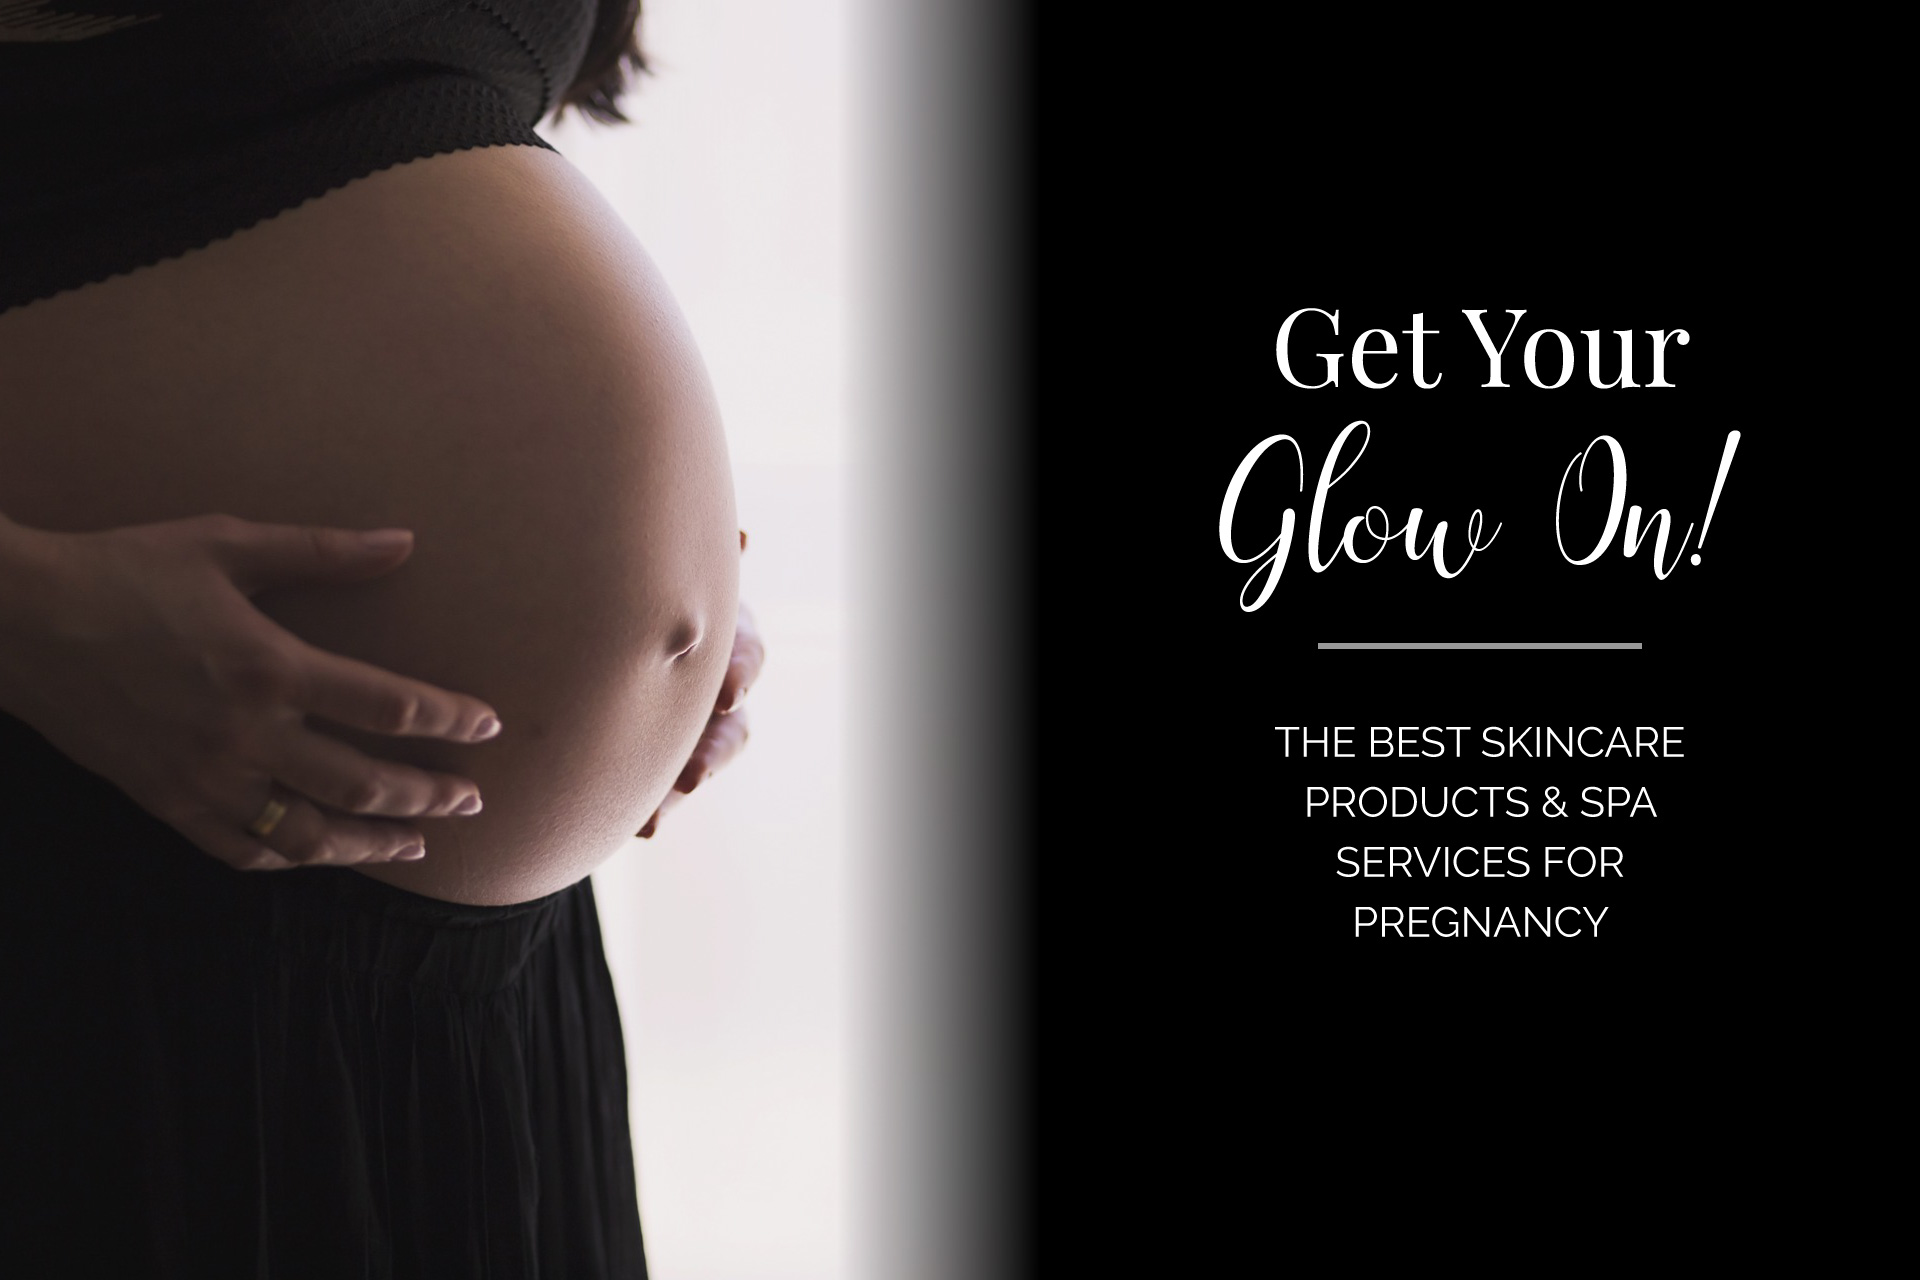 Get Your Glow On! The Best Skincare Products and Spa Services for Pregnancy